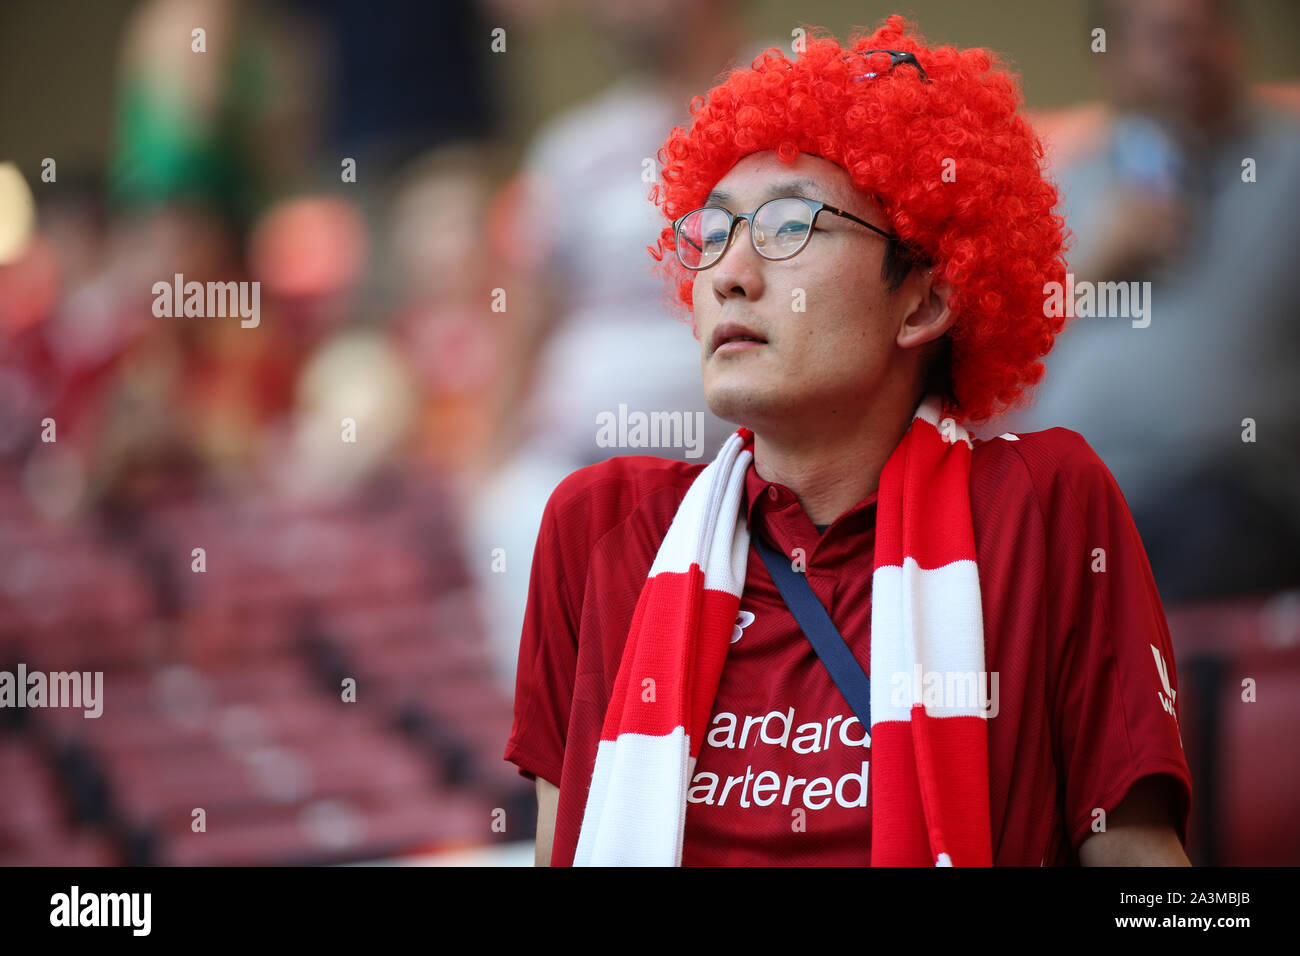 MADRID, SPAIN - JUNE 01, 2019: Liverpool fans pictured during the final of the 2019/20 UEFA Champions League Final. Stock Photo